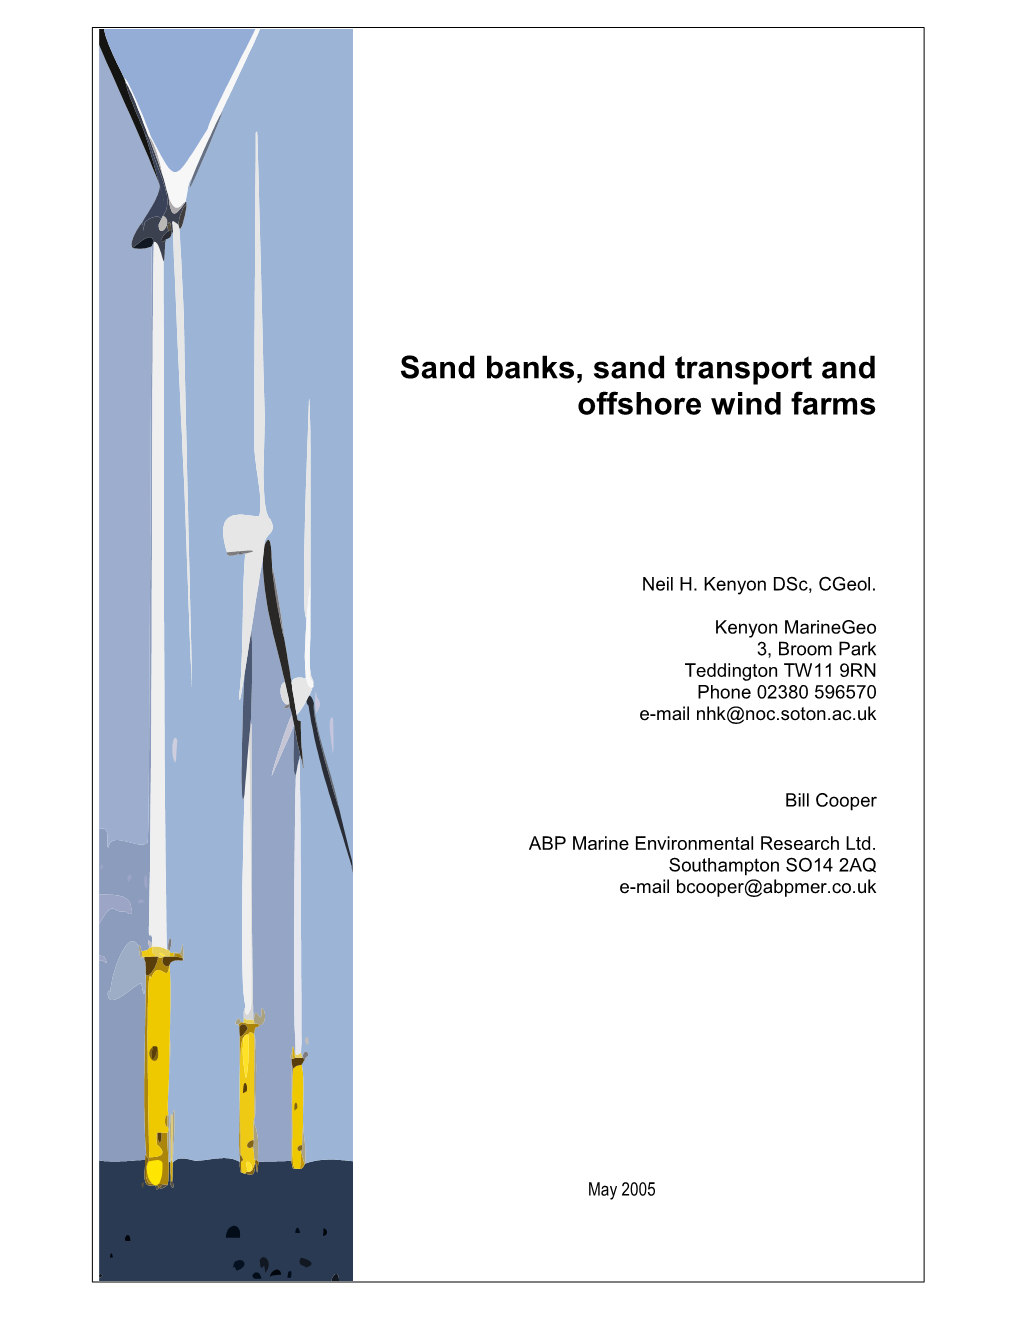 Sand Banks, Sand Transport and Offshore Wind Farms